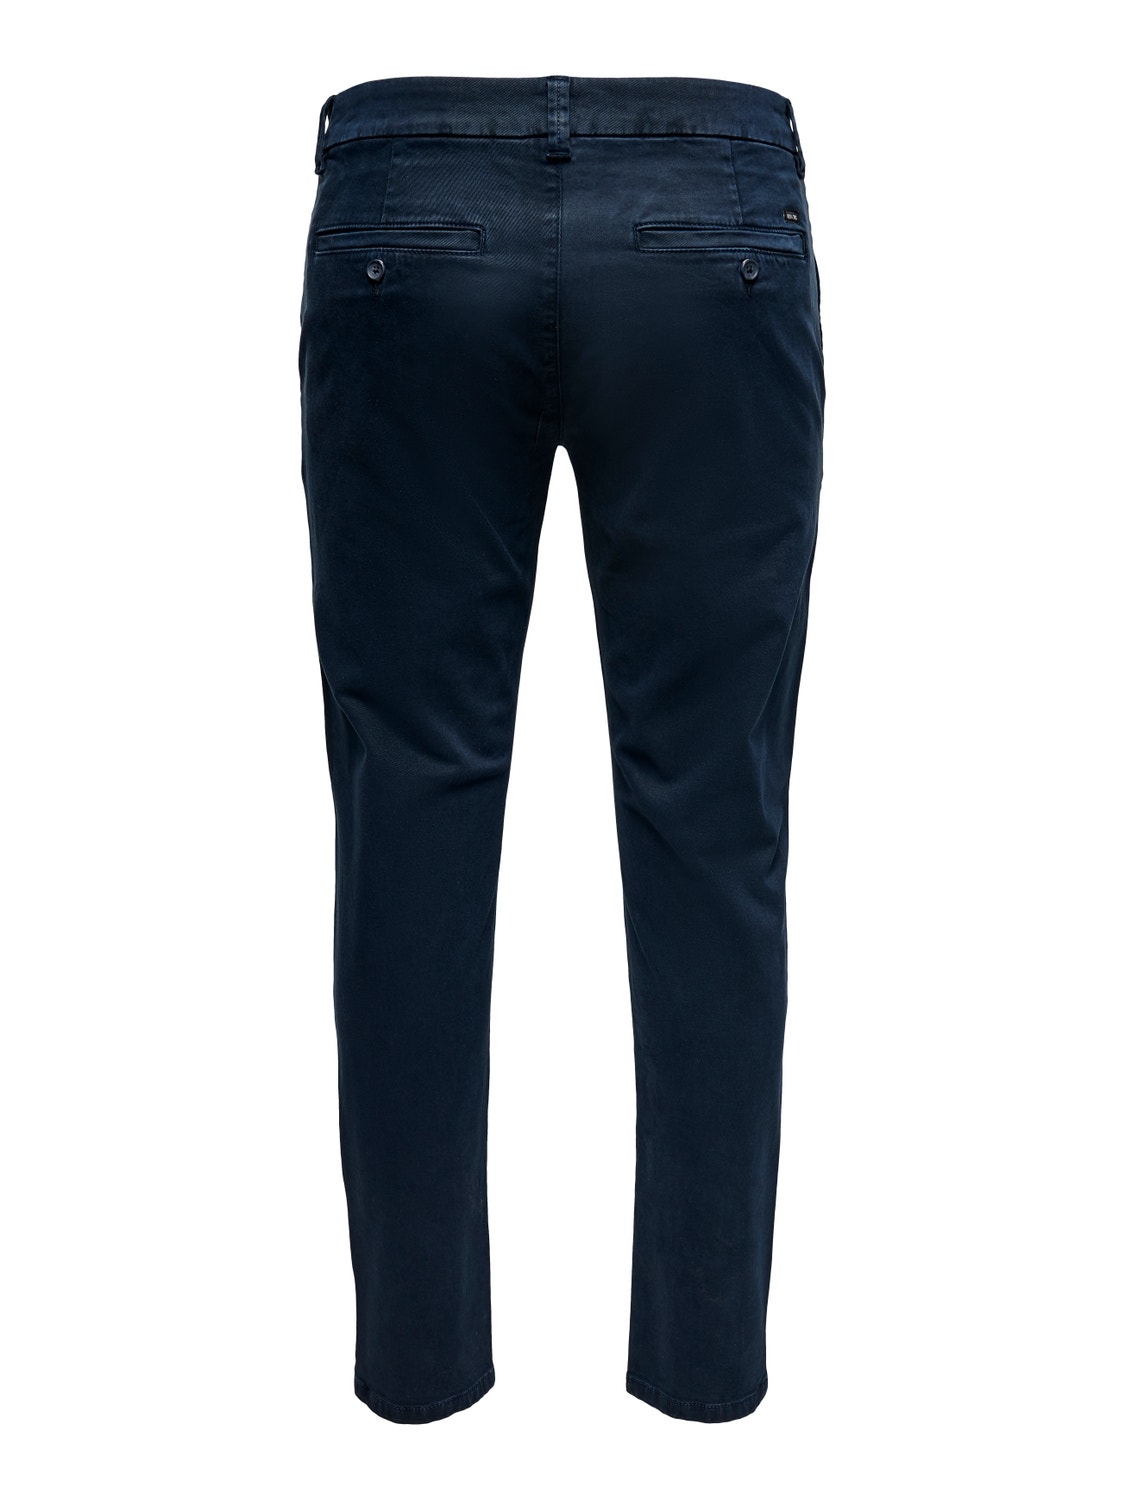 ONLY & SONS Mid waist chino trousers -Dark Navy - 22019934